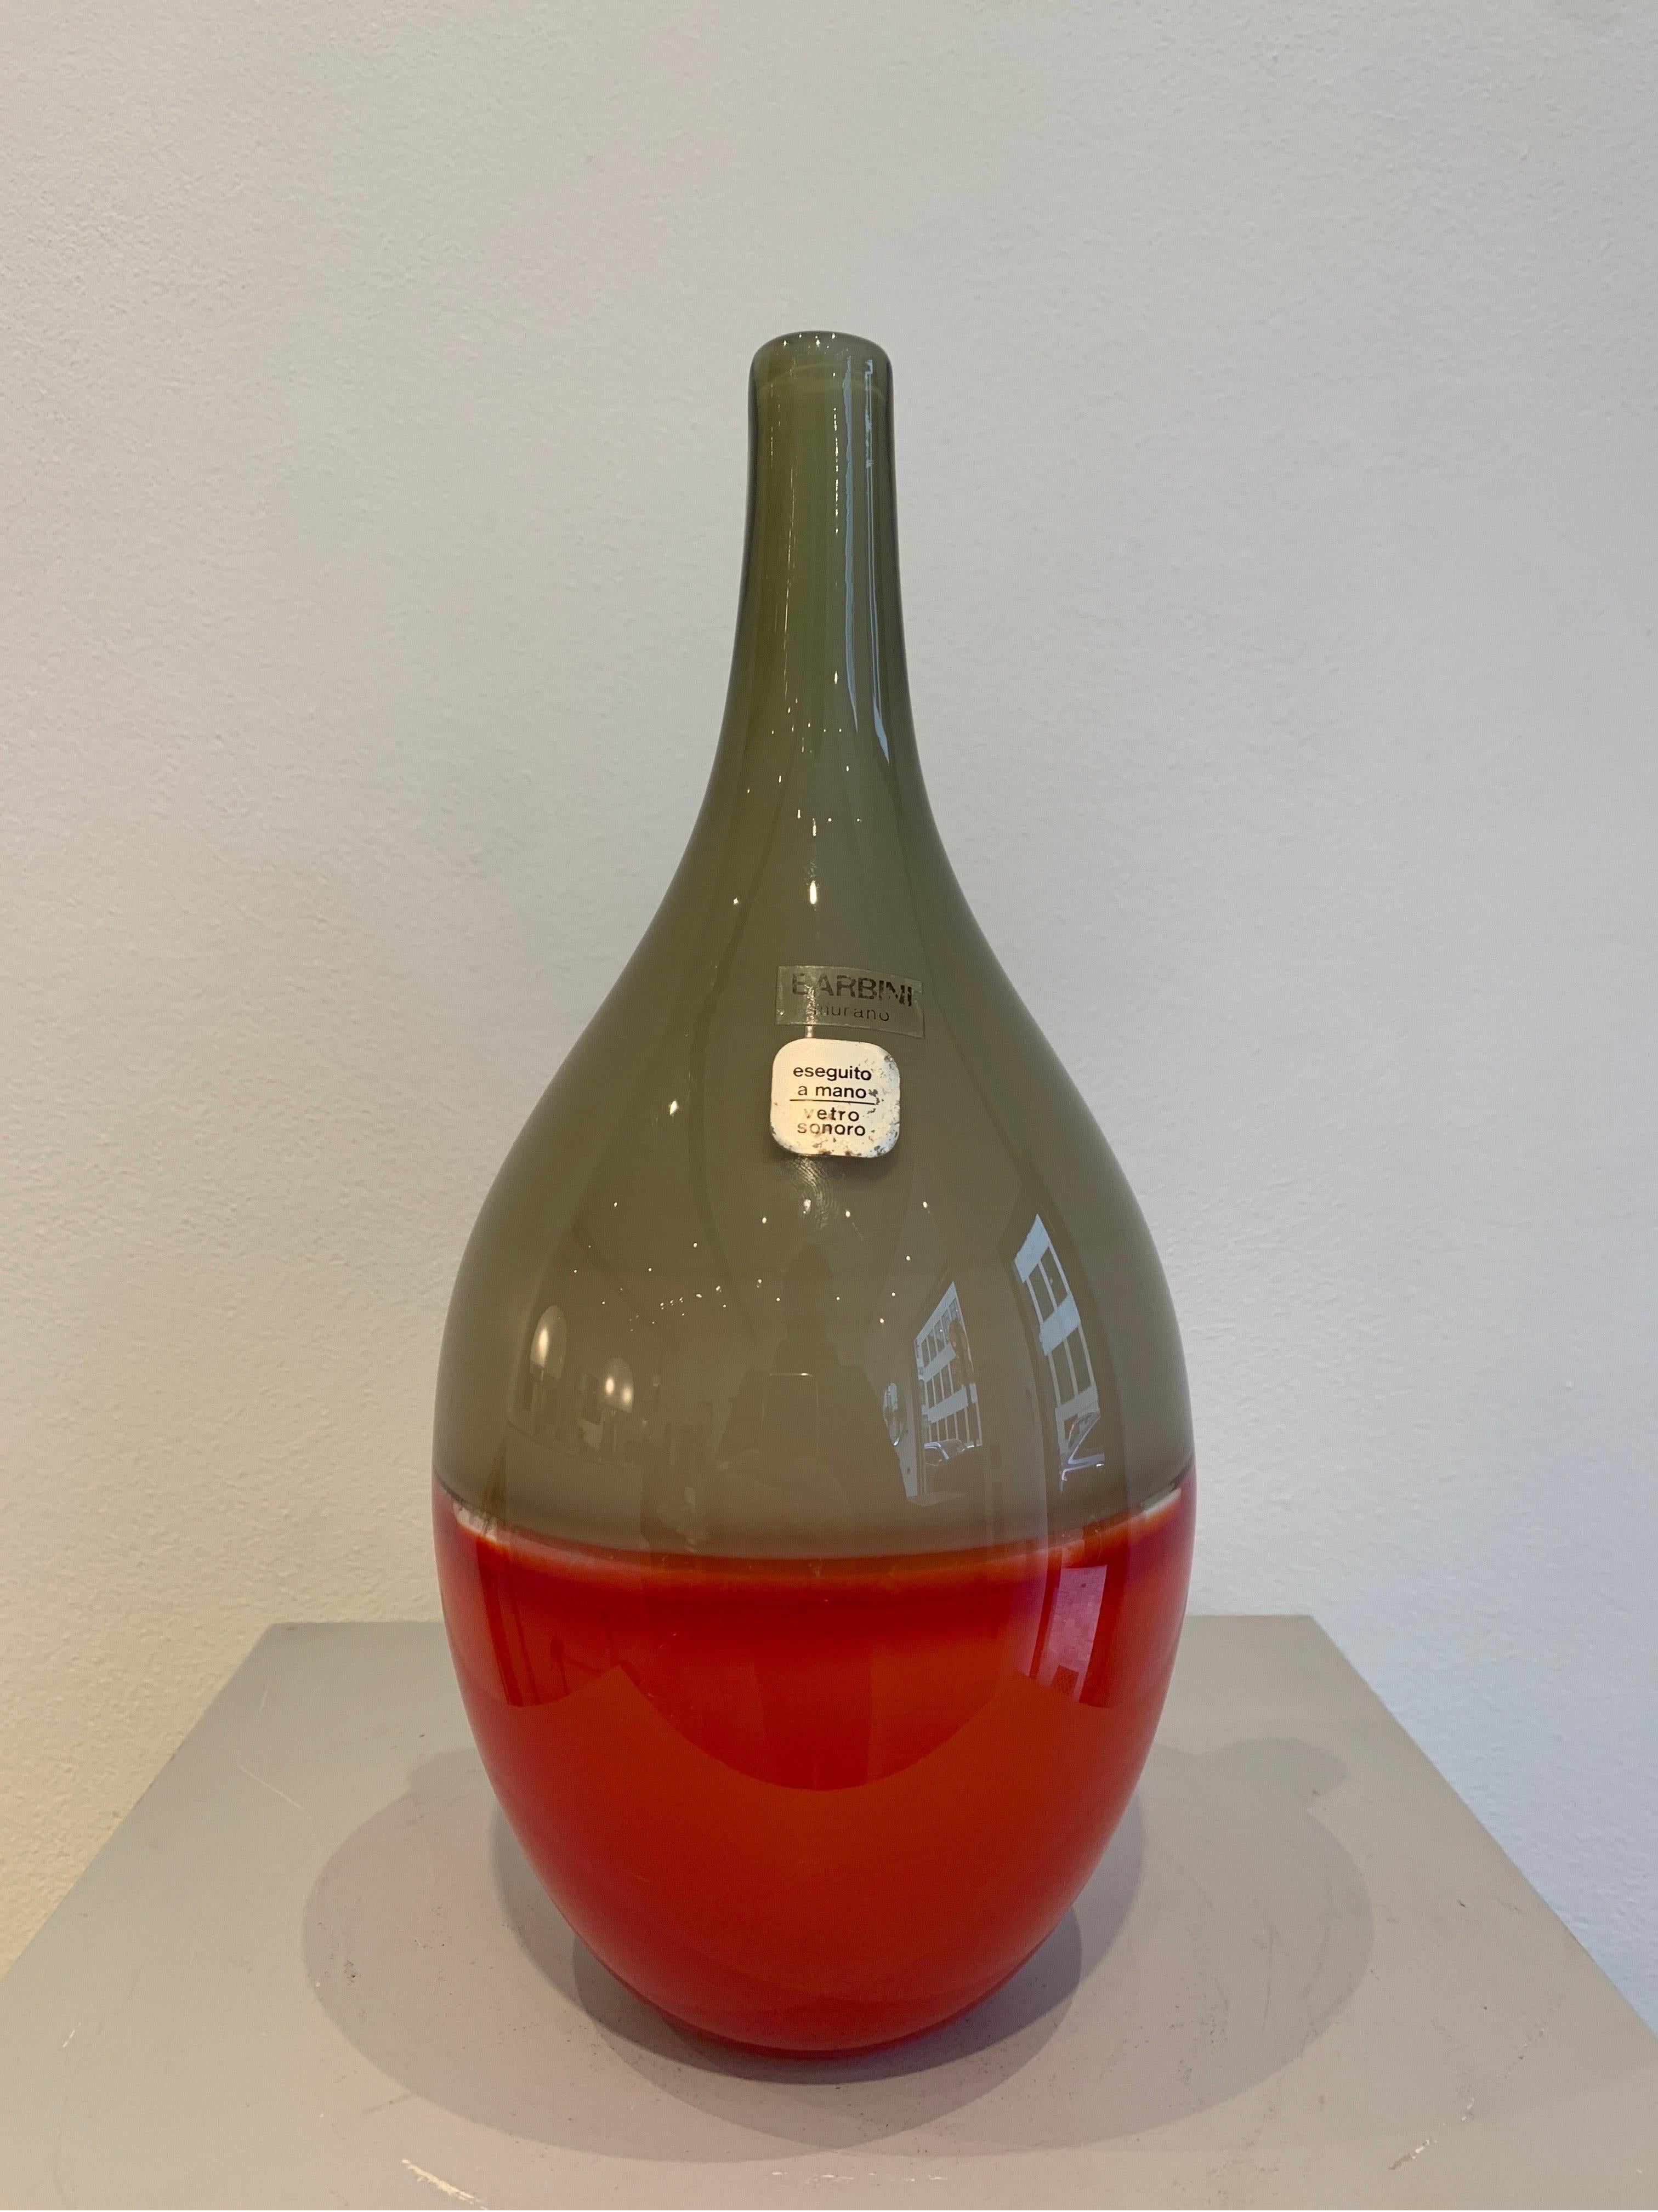 Alfredo Barbini is an Italian Glass maker who designed is now creations. The present vase was designed in the 1980s.